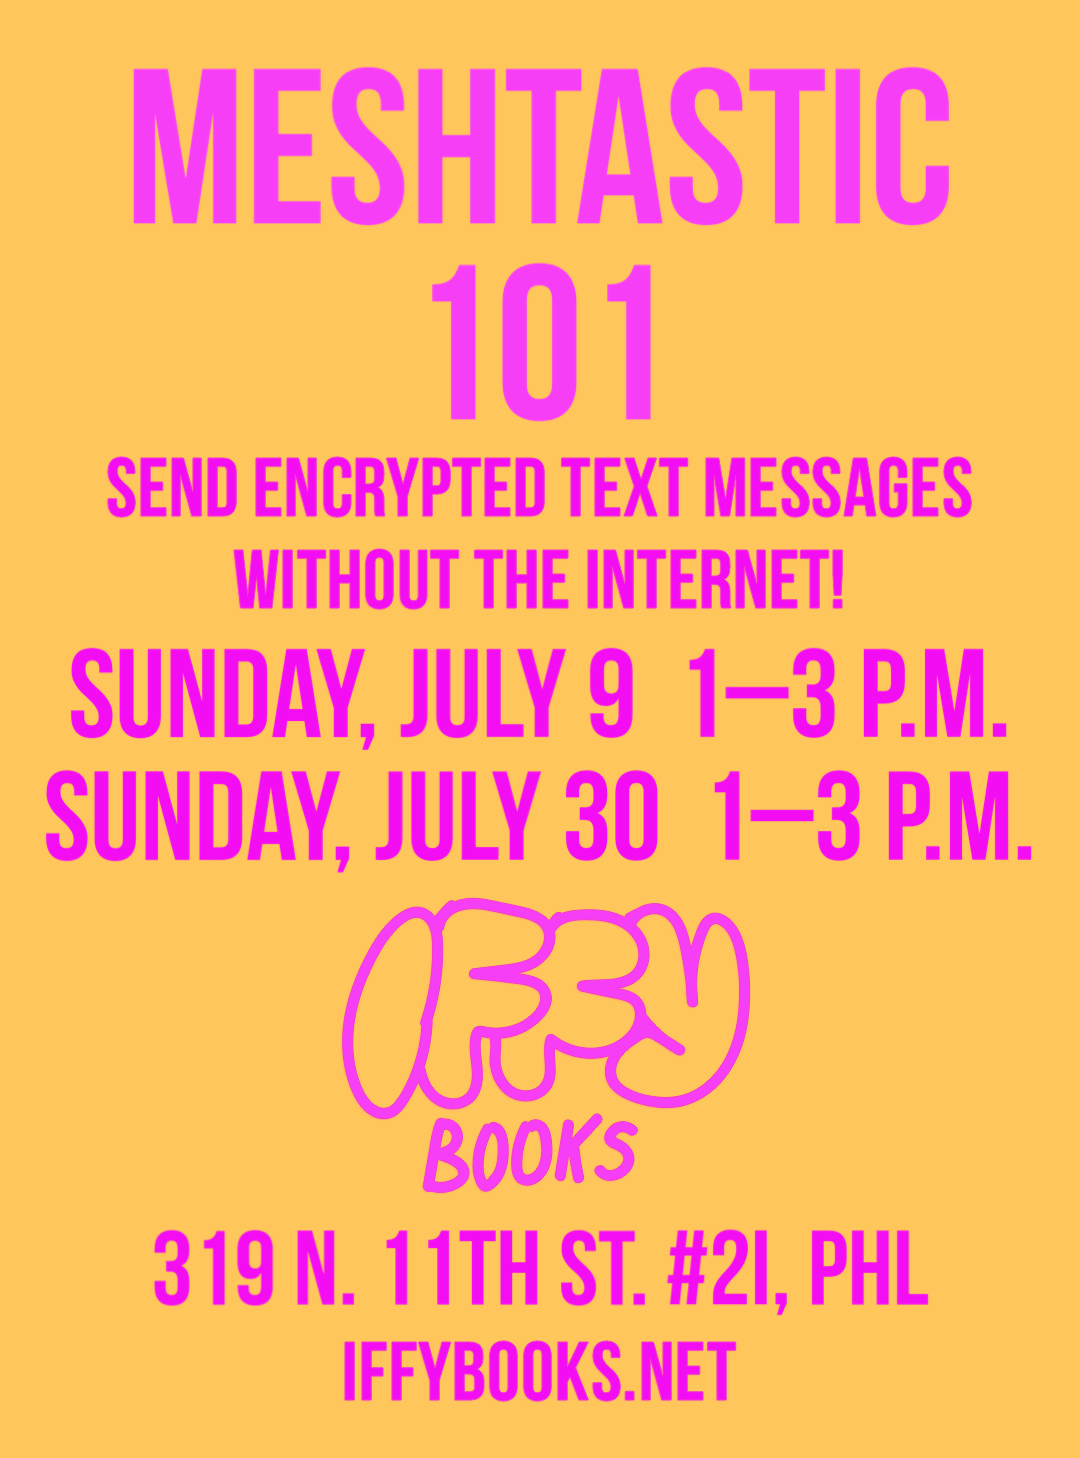 Pink text on a yellow background: Meshtastic 101 / Send encrypted text messages without the internet! / Sunday, July 9 1–3 p.m. / Sunday, July 30 1–3 p.m. / Iffy Books / 319 N. 11th St. #2I, PHL iffybooks.net